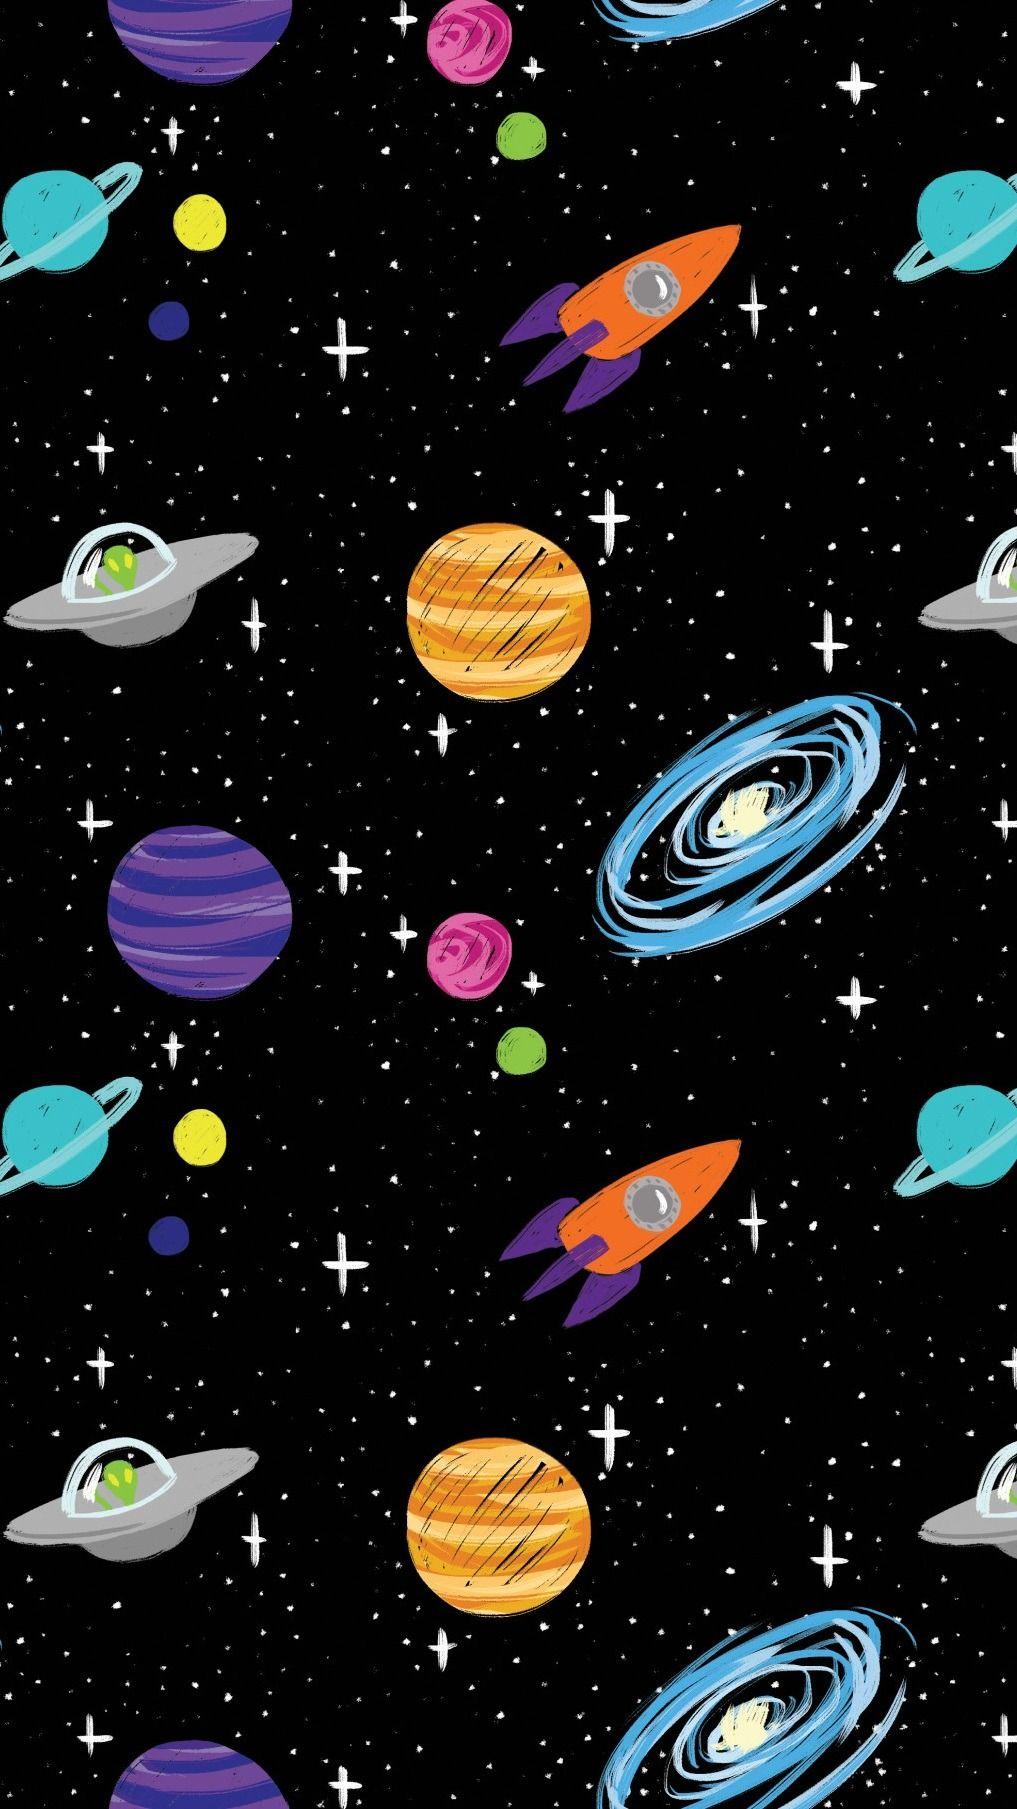 Aesthetic planets wallpapers